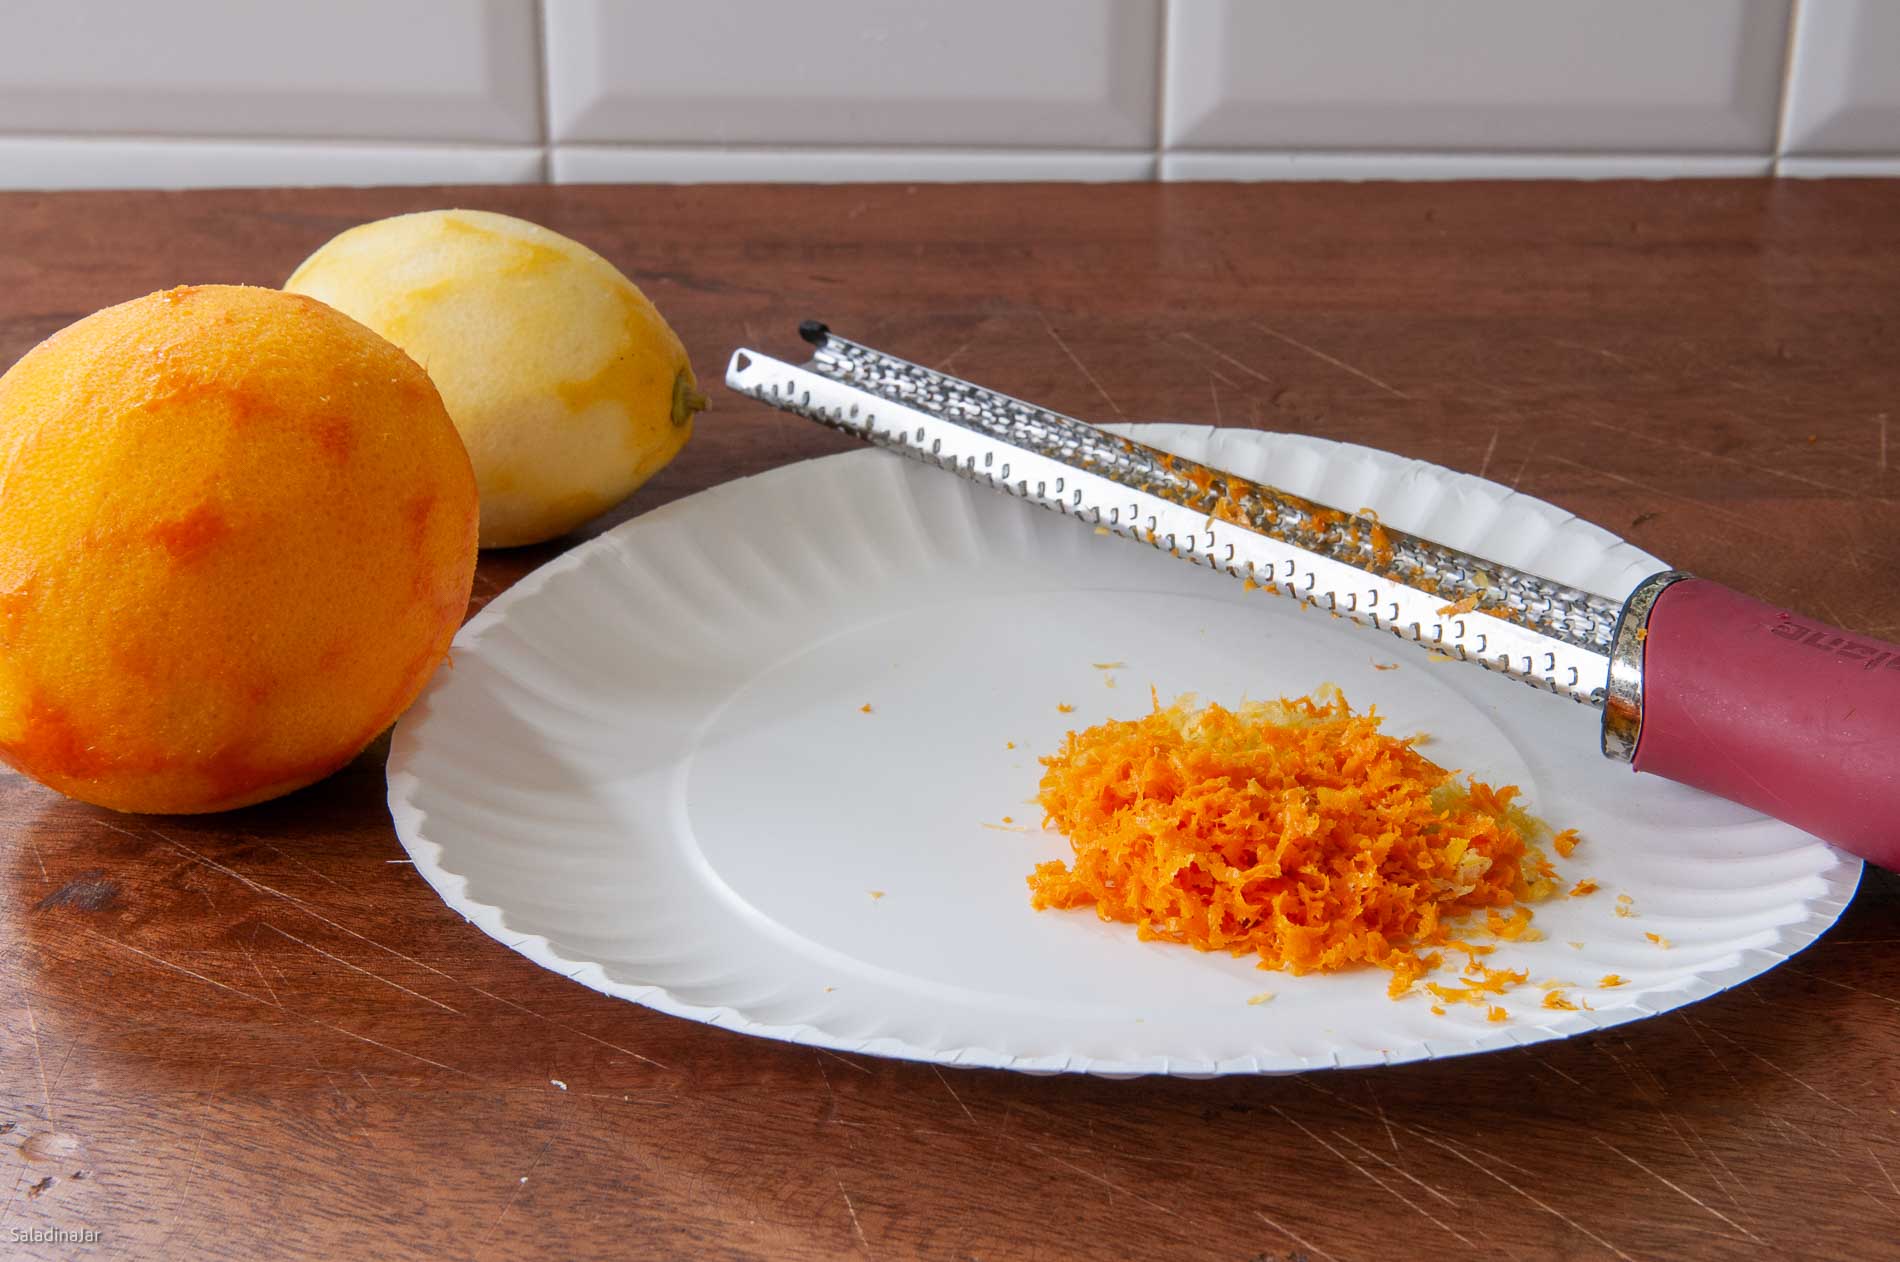 Grating rind for orange curd with a microplane grater.